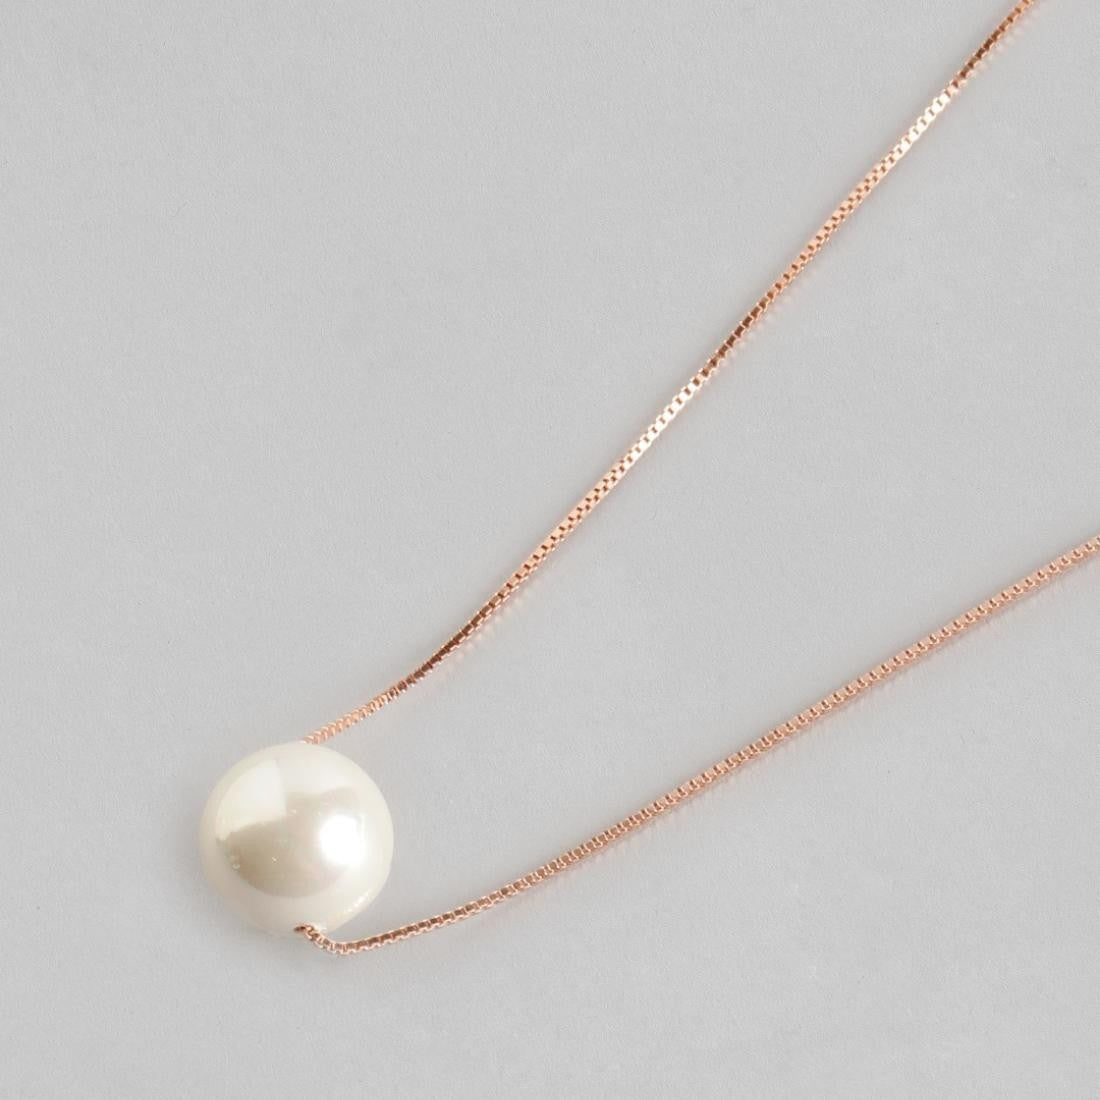 Stunning Pearl 925 Silver Necklace